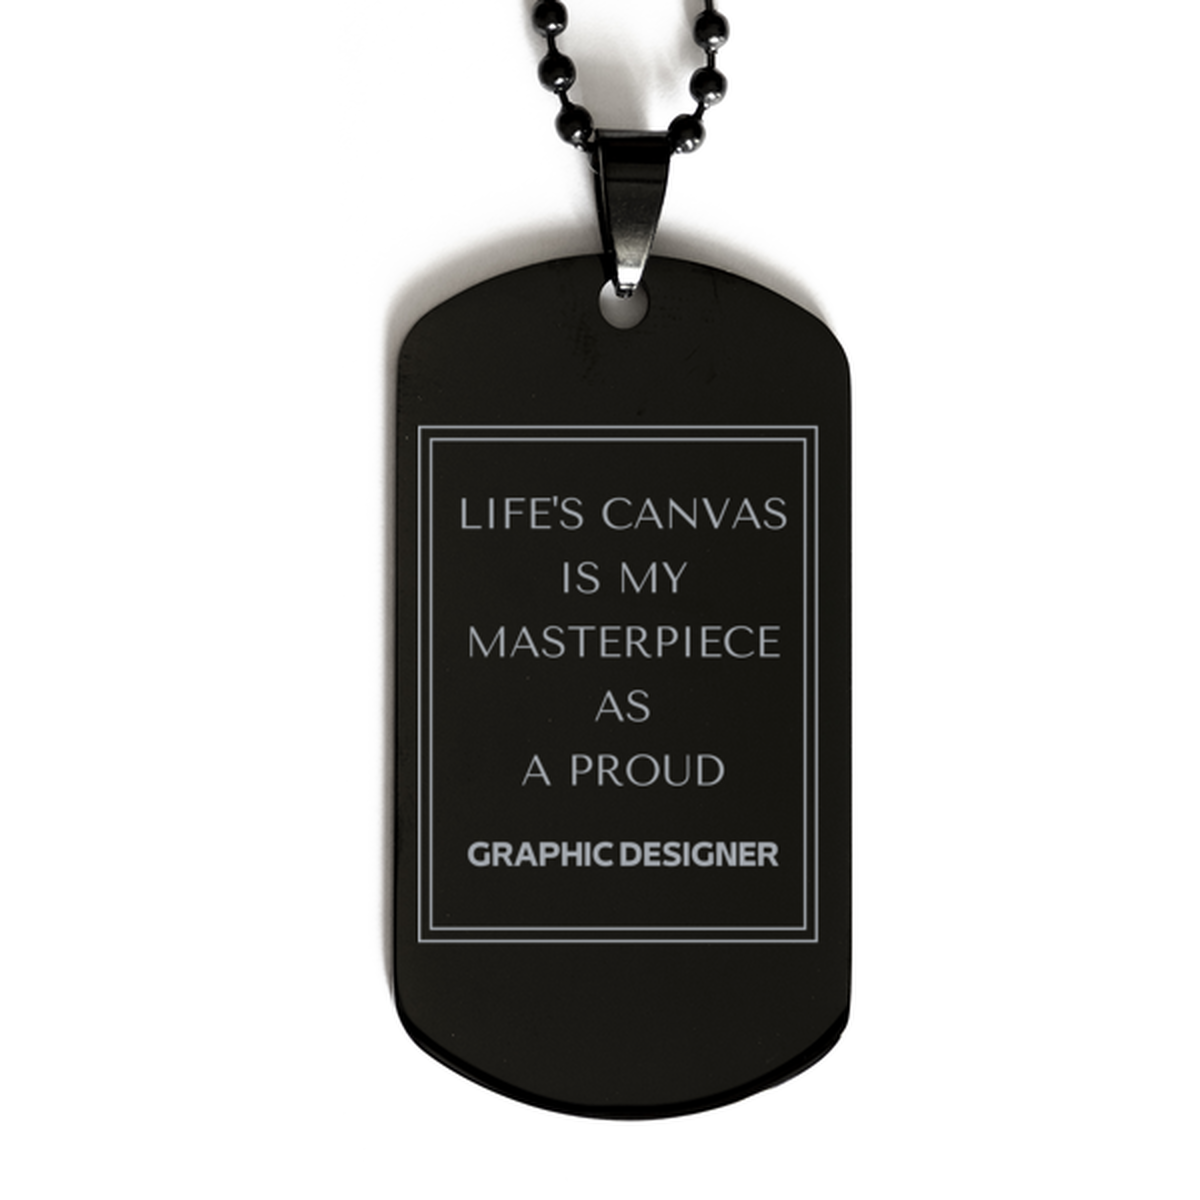 Proud Graphic Designer Gifts, Life's canvas is my masterpiece, Epic Birthday Christmas Unique Black Dog Tag For Graphic Designer, Coworkers, Men, Women, Friends